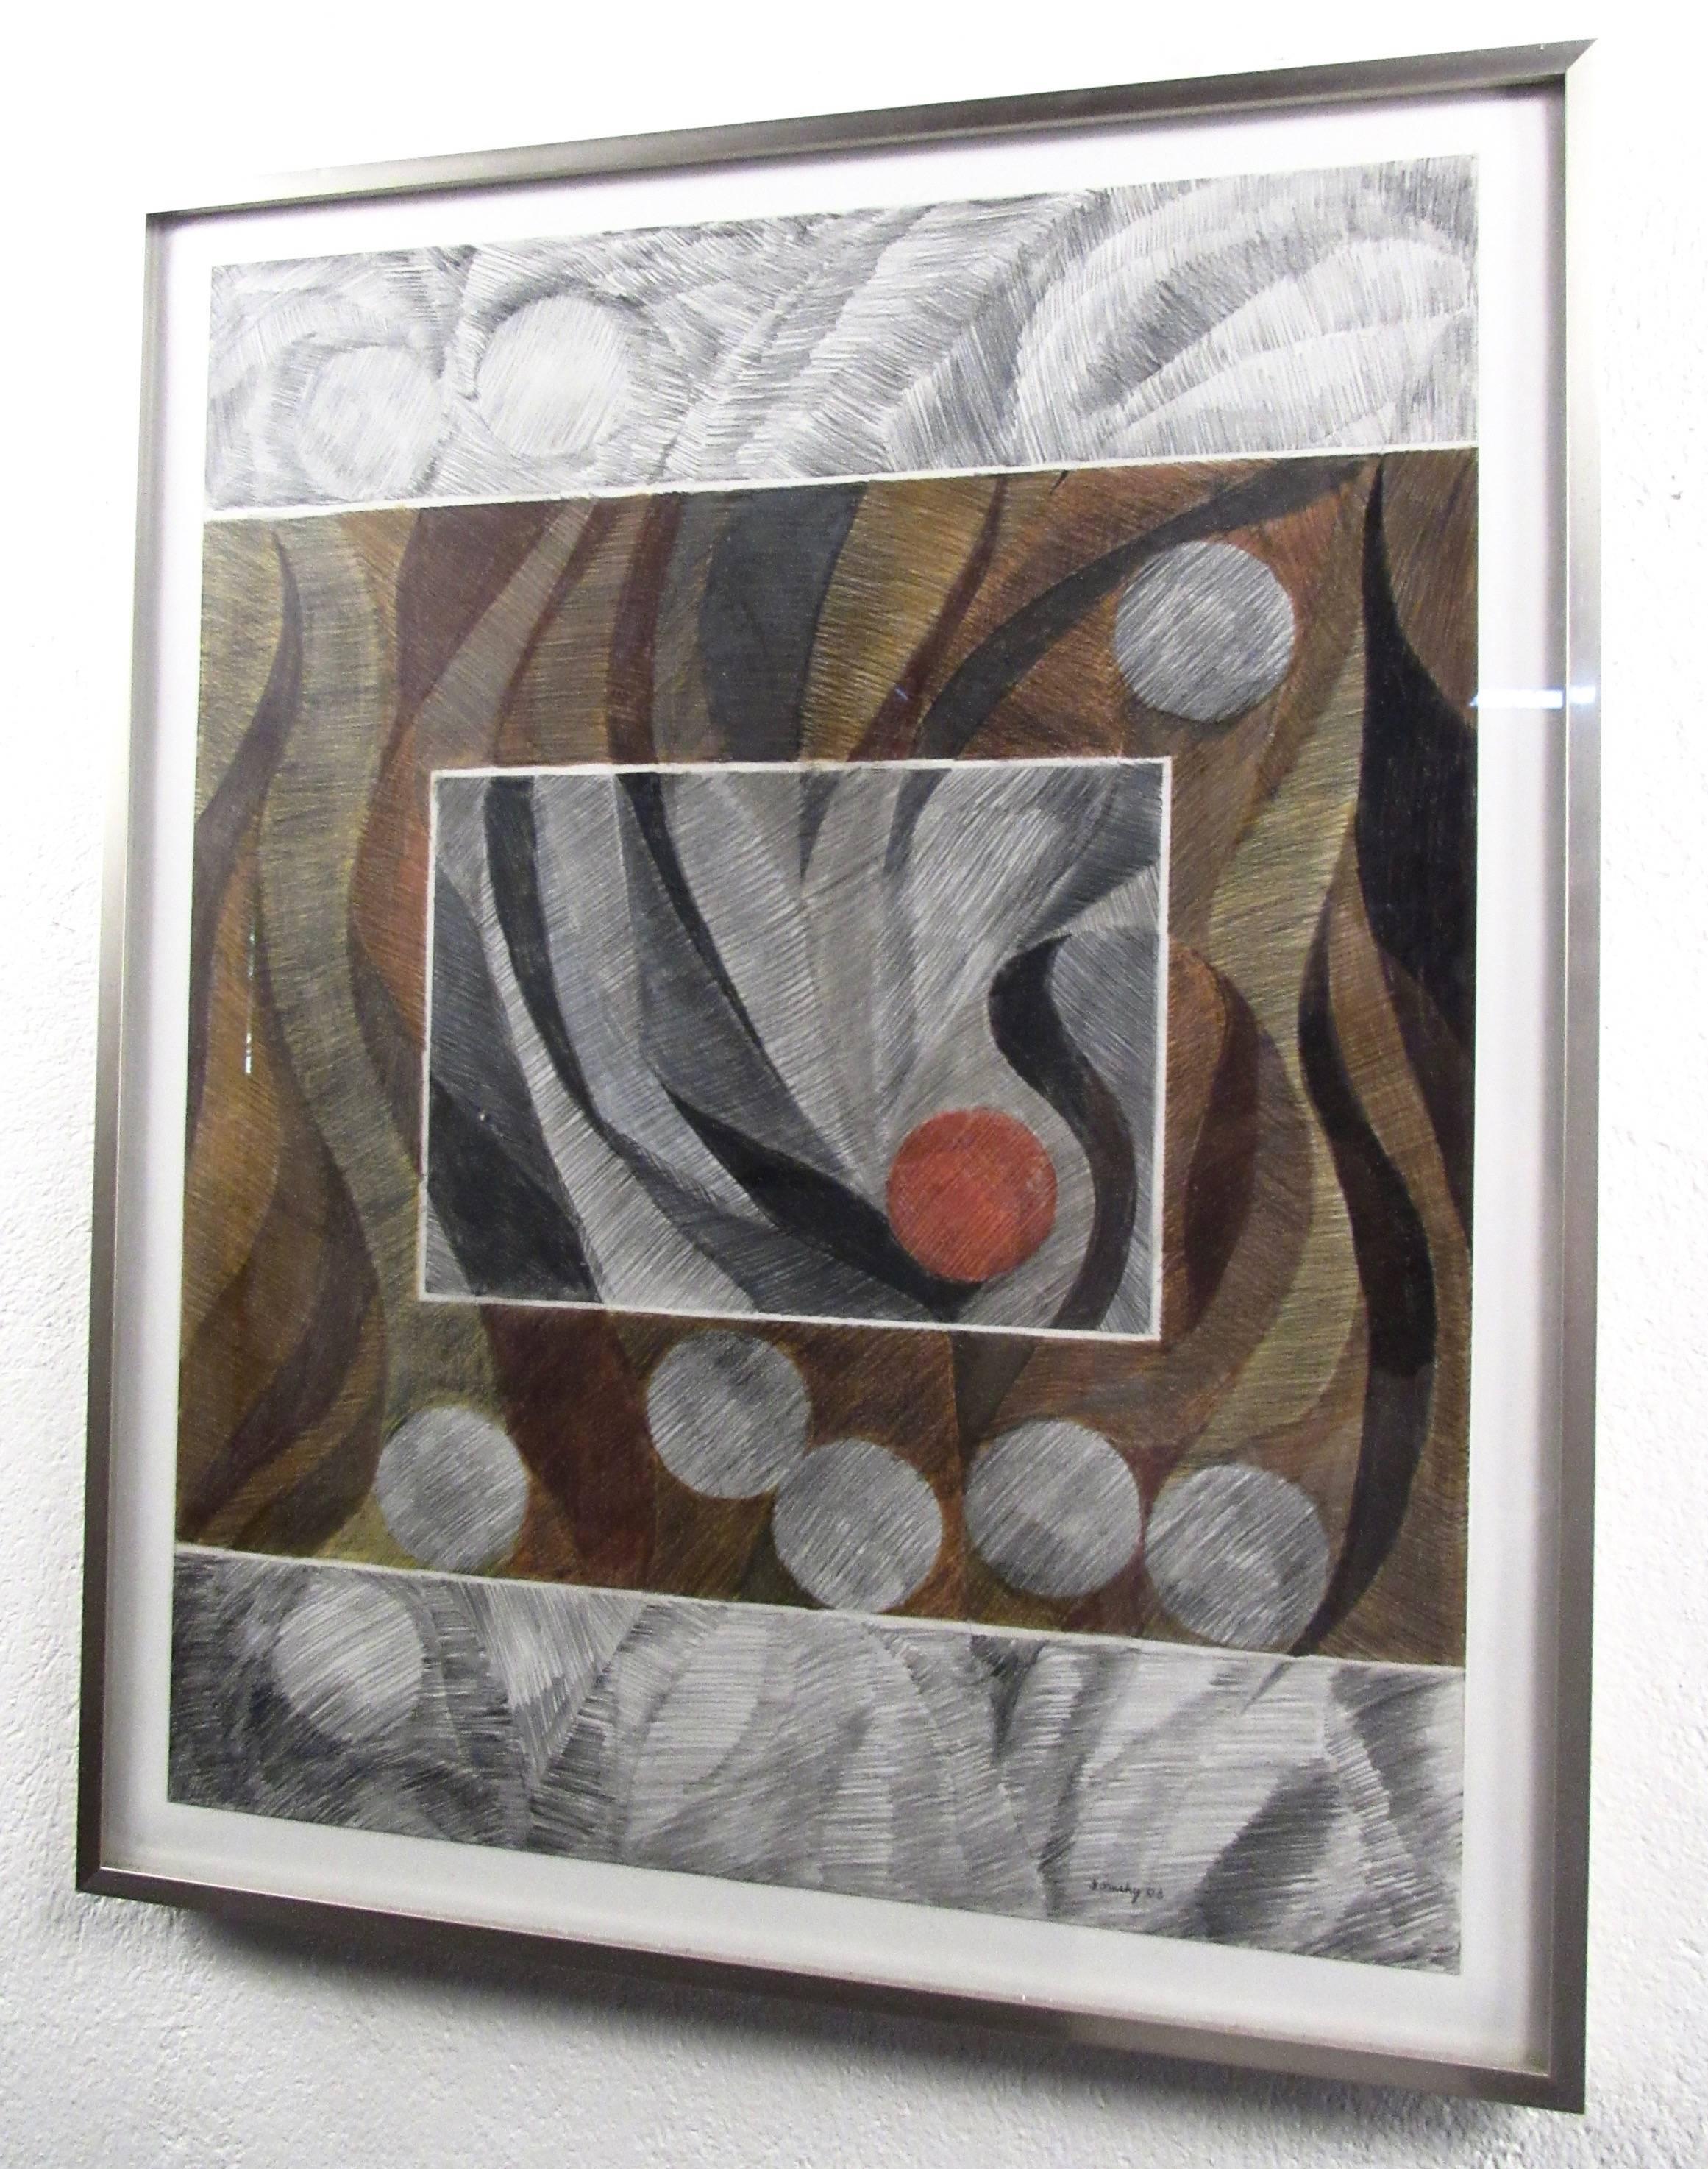 This unique geometric abstract drawing by Charlesa Domsky of Philadelphia makes a beautiful modern addition to any setting. Fantastic example of traditional pencil drawing, with a wonderful modernistic aesthetic. Please confirm item location (NY or